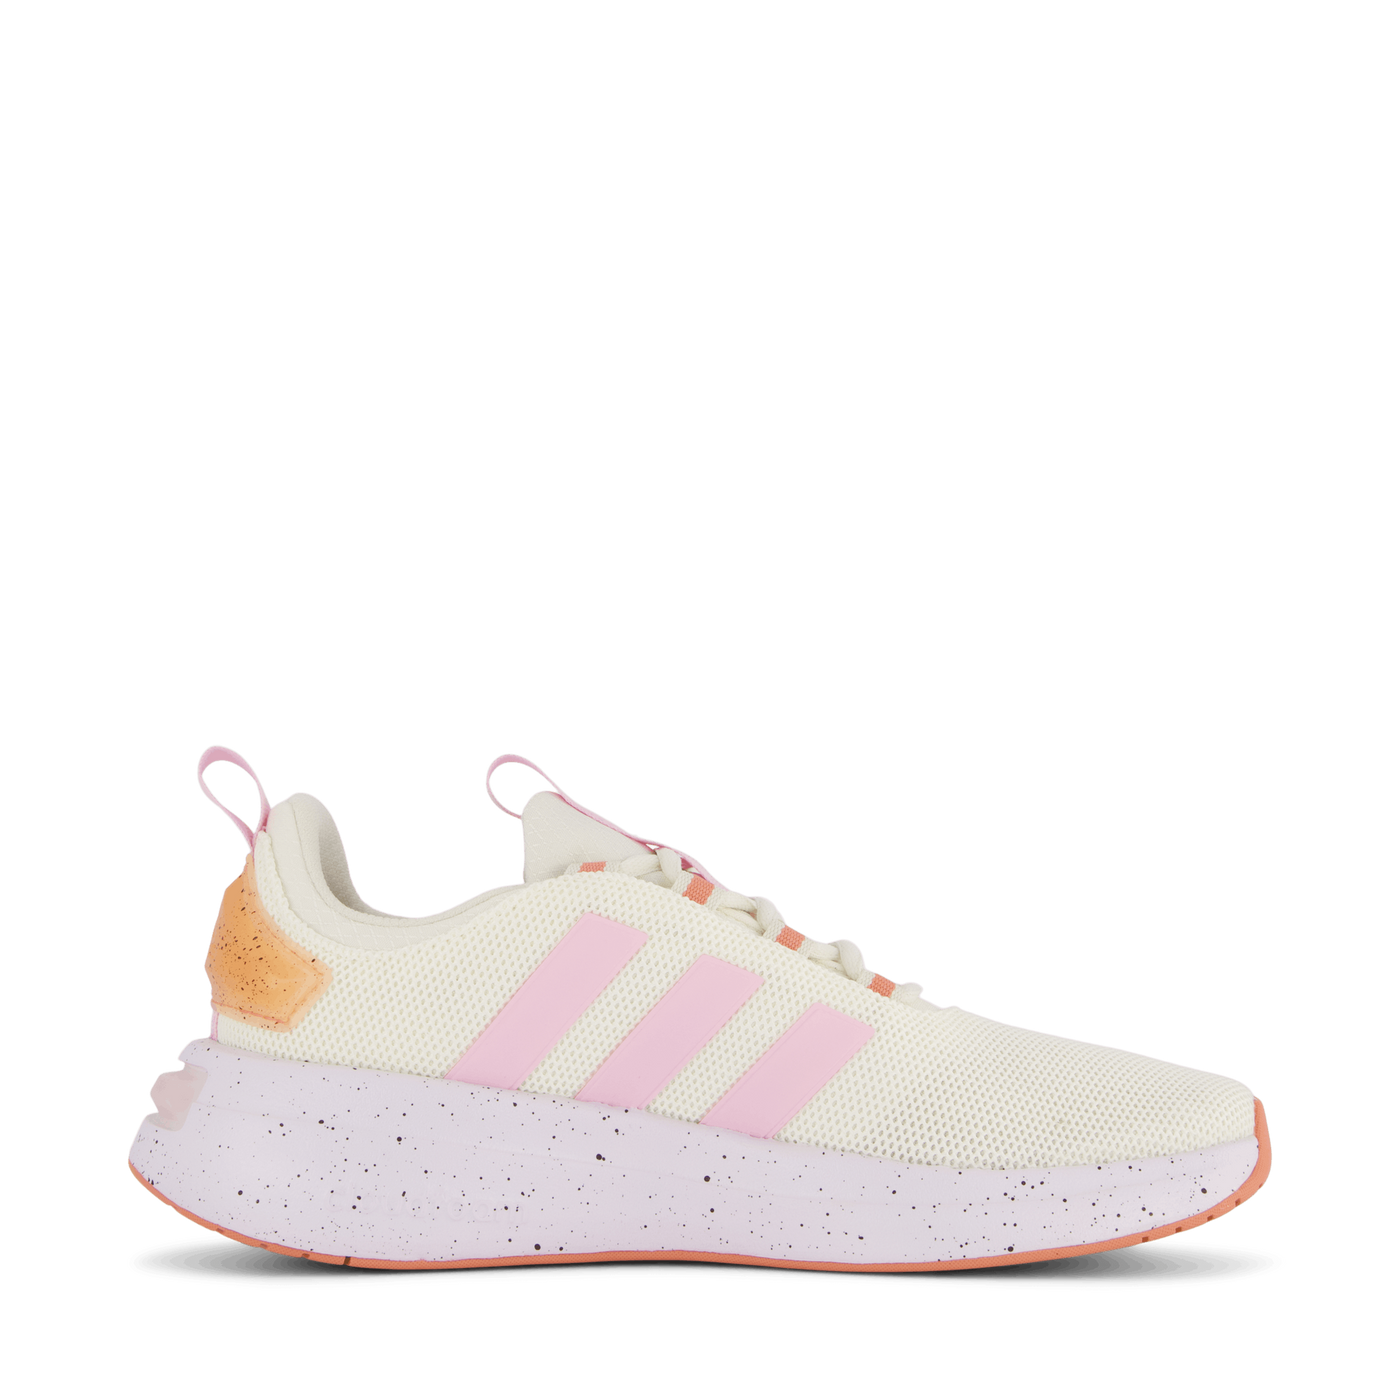 Racer TR23 Shoes Off White / Orchid Fusion / Wonder Beige